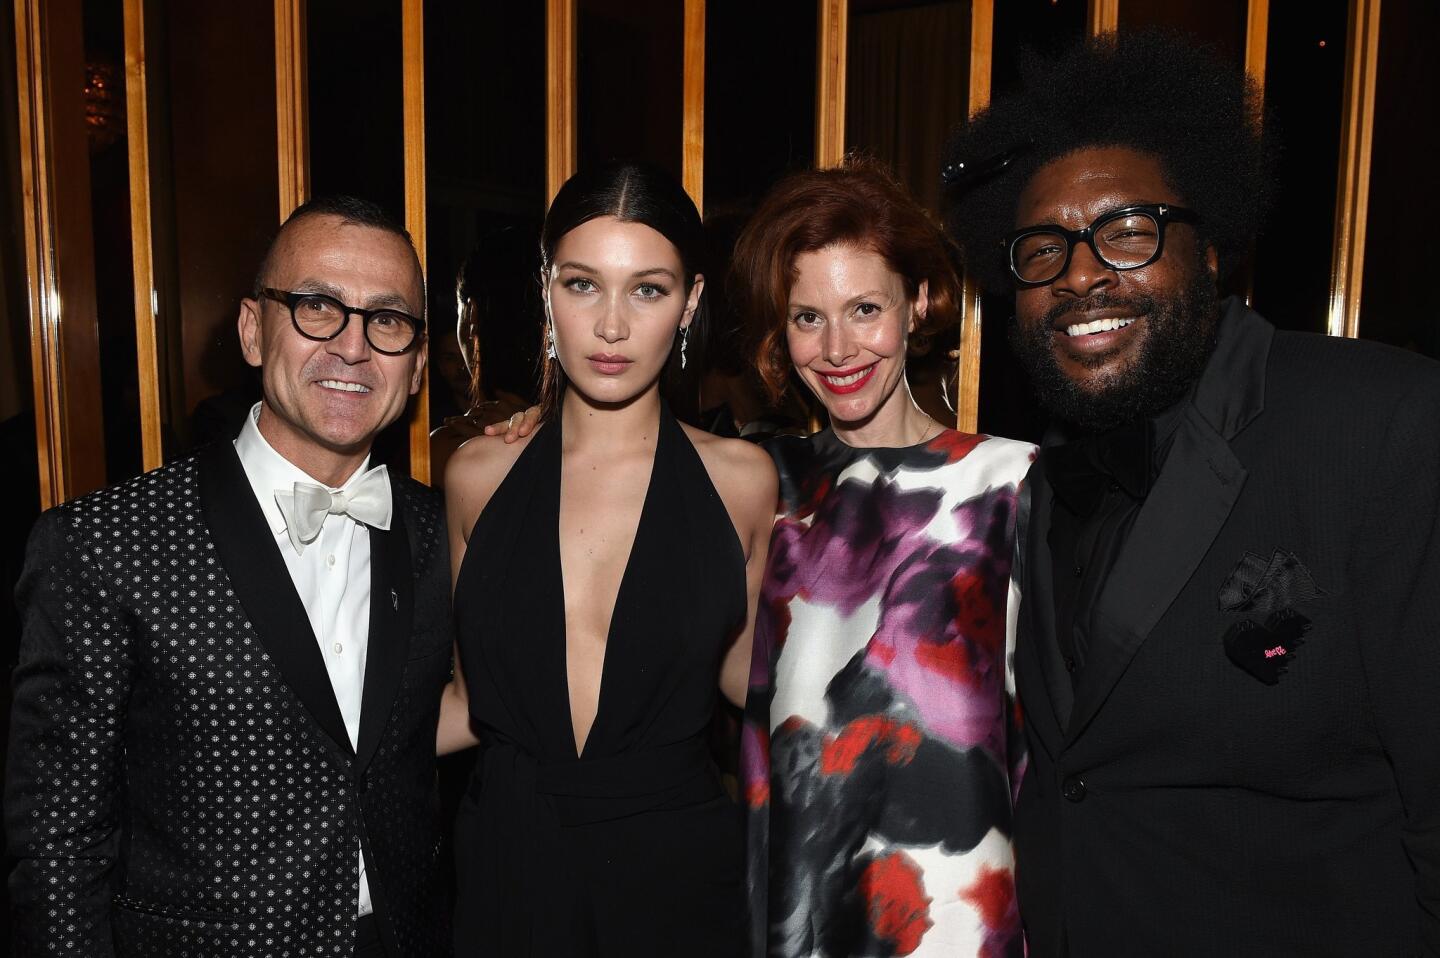 CFDA Fashion Awards: After party